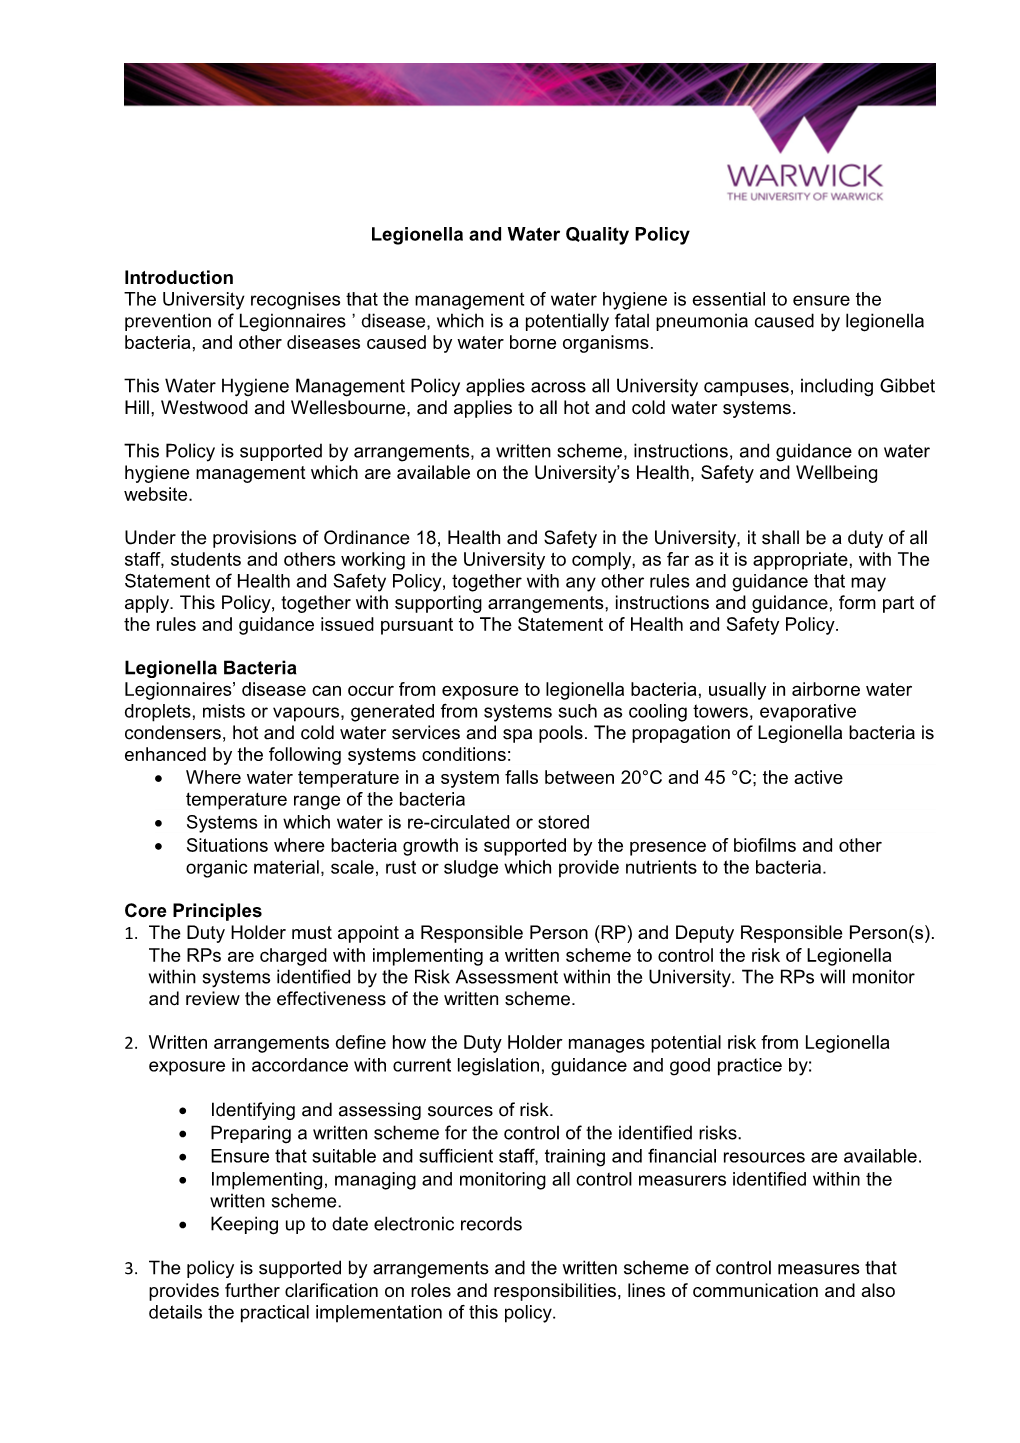 Legionella and Water Quality Policy